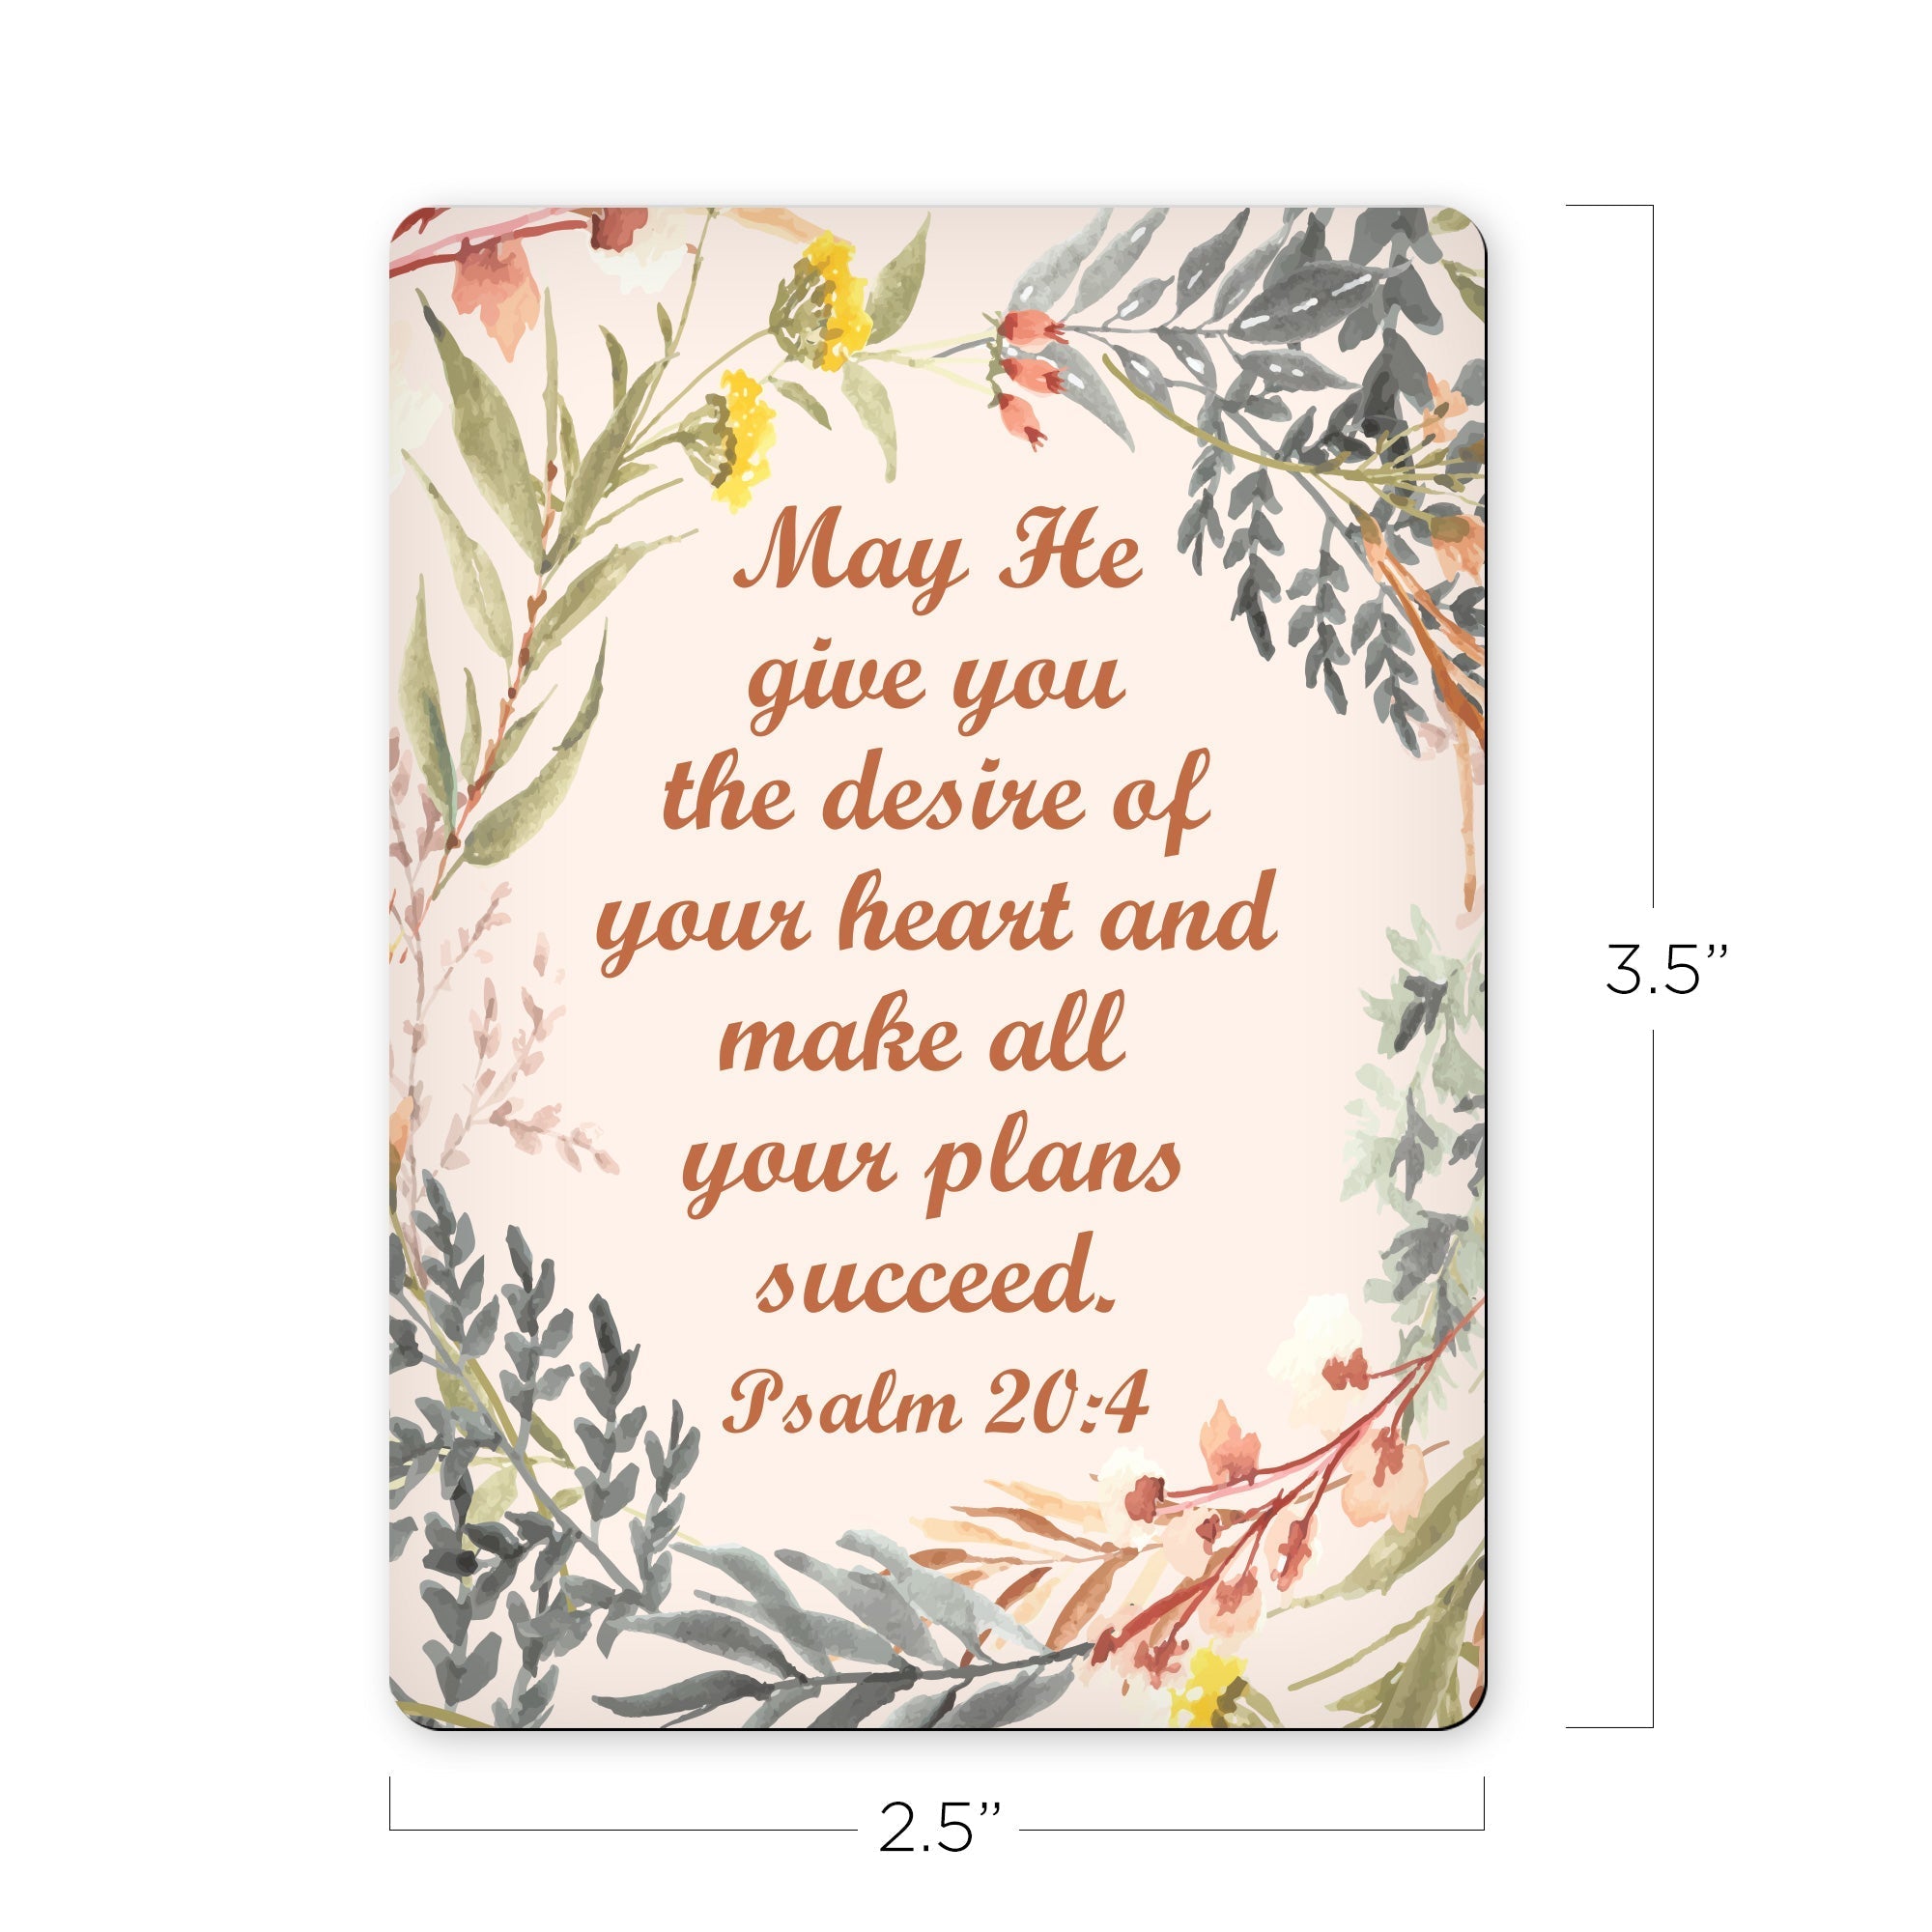 The Desires of your Heart - Psalm 20:4 - Scripture Magnet